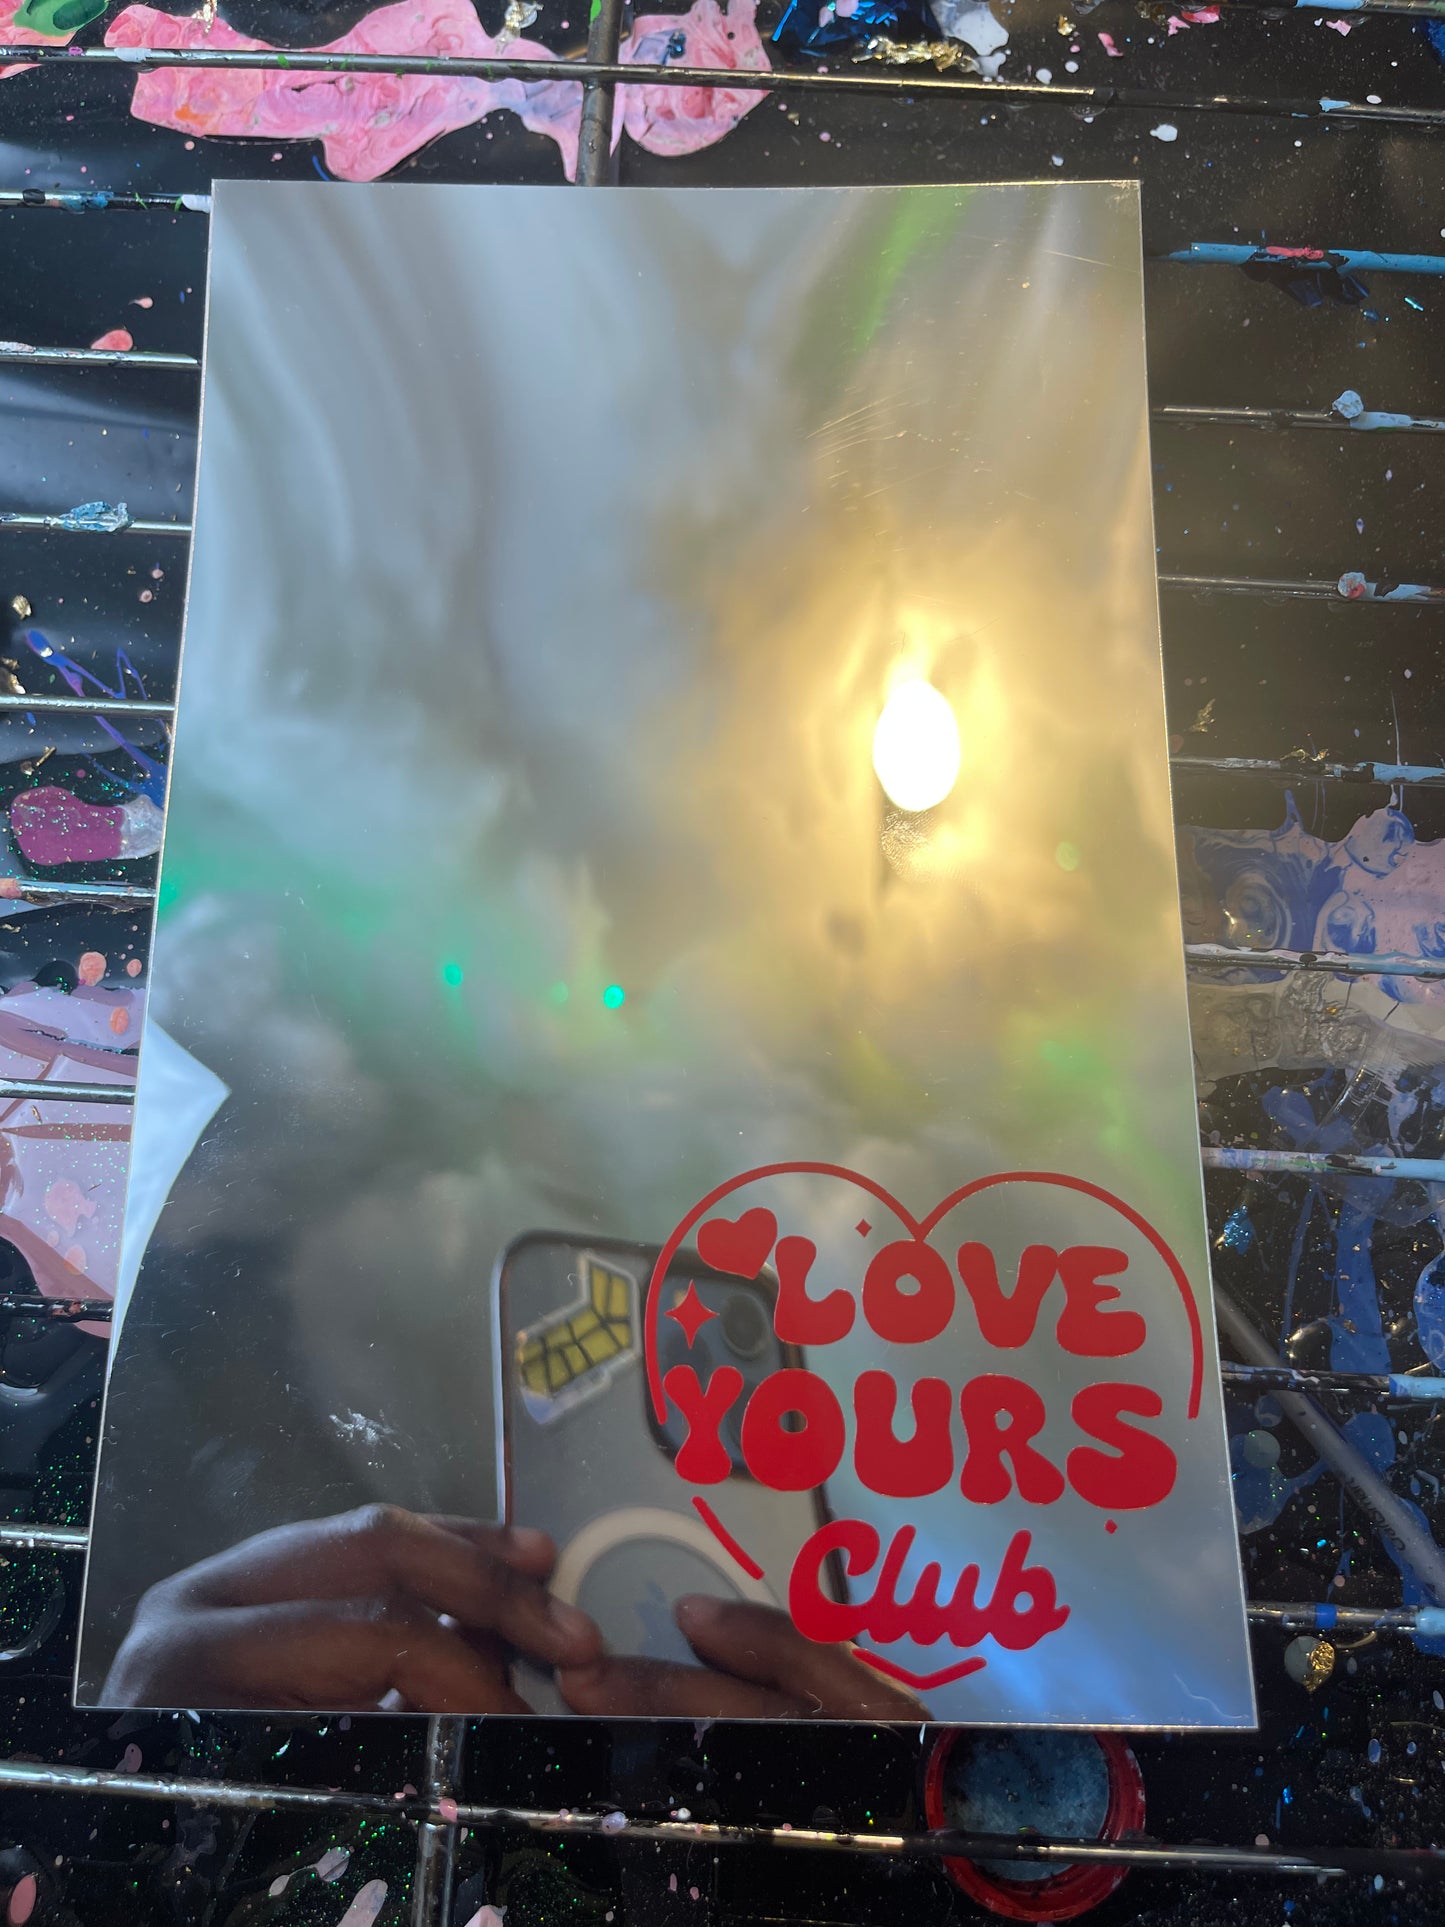 Love yours club mirrors